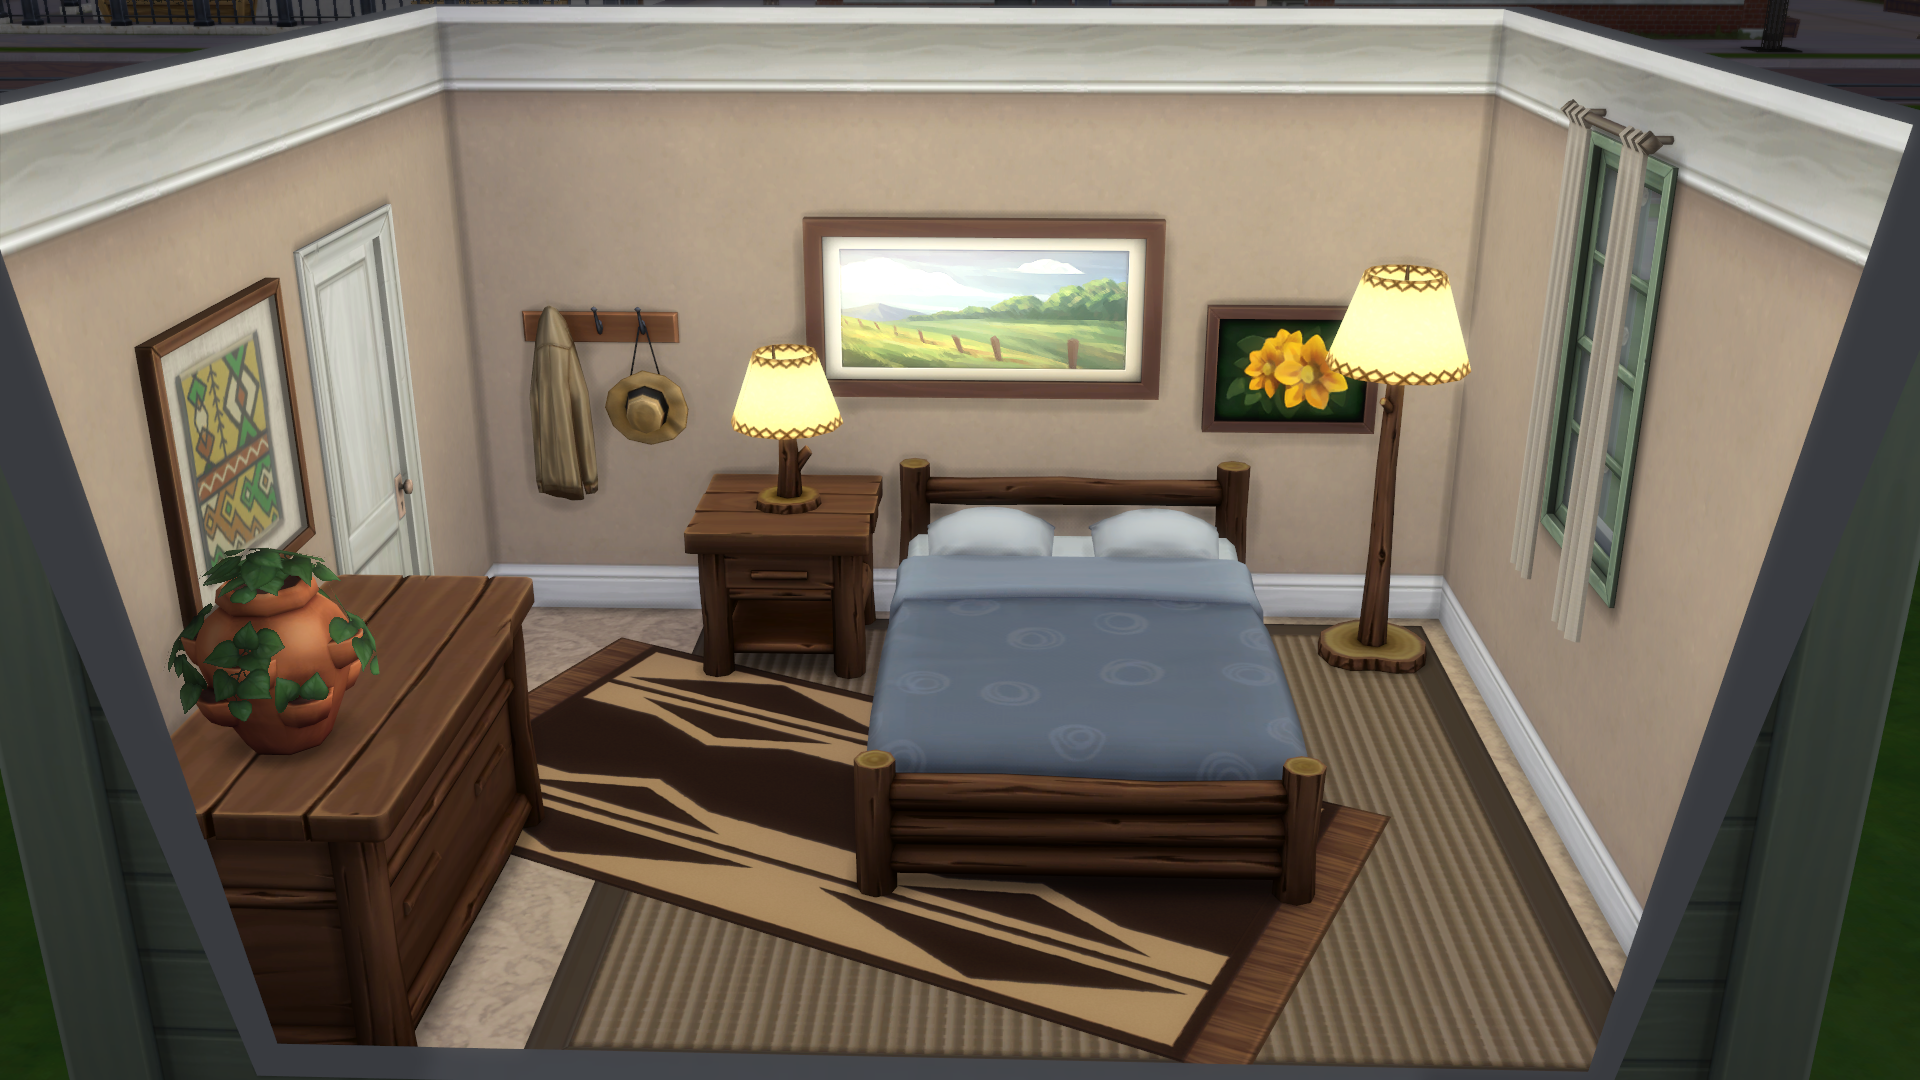 The Sims 4 Upgrading Your Starter Home Bedroom Basics Simsvip